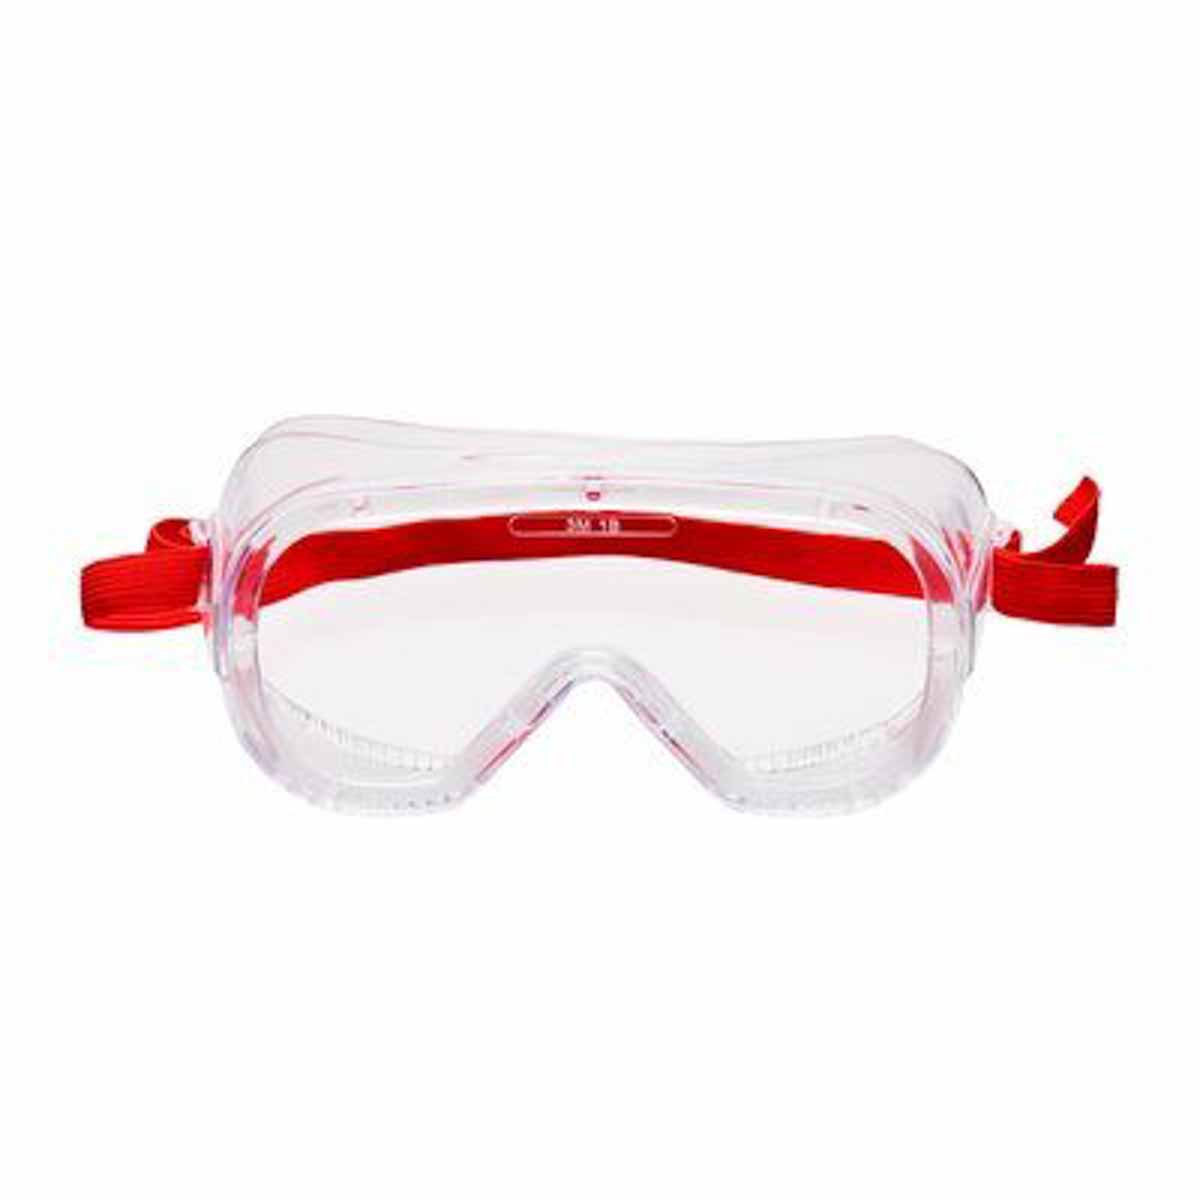 3M 4800 Anti-Mist Safety Goggles with Clear Lenses